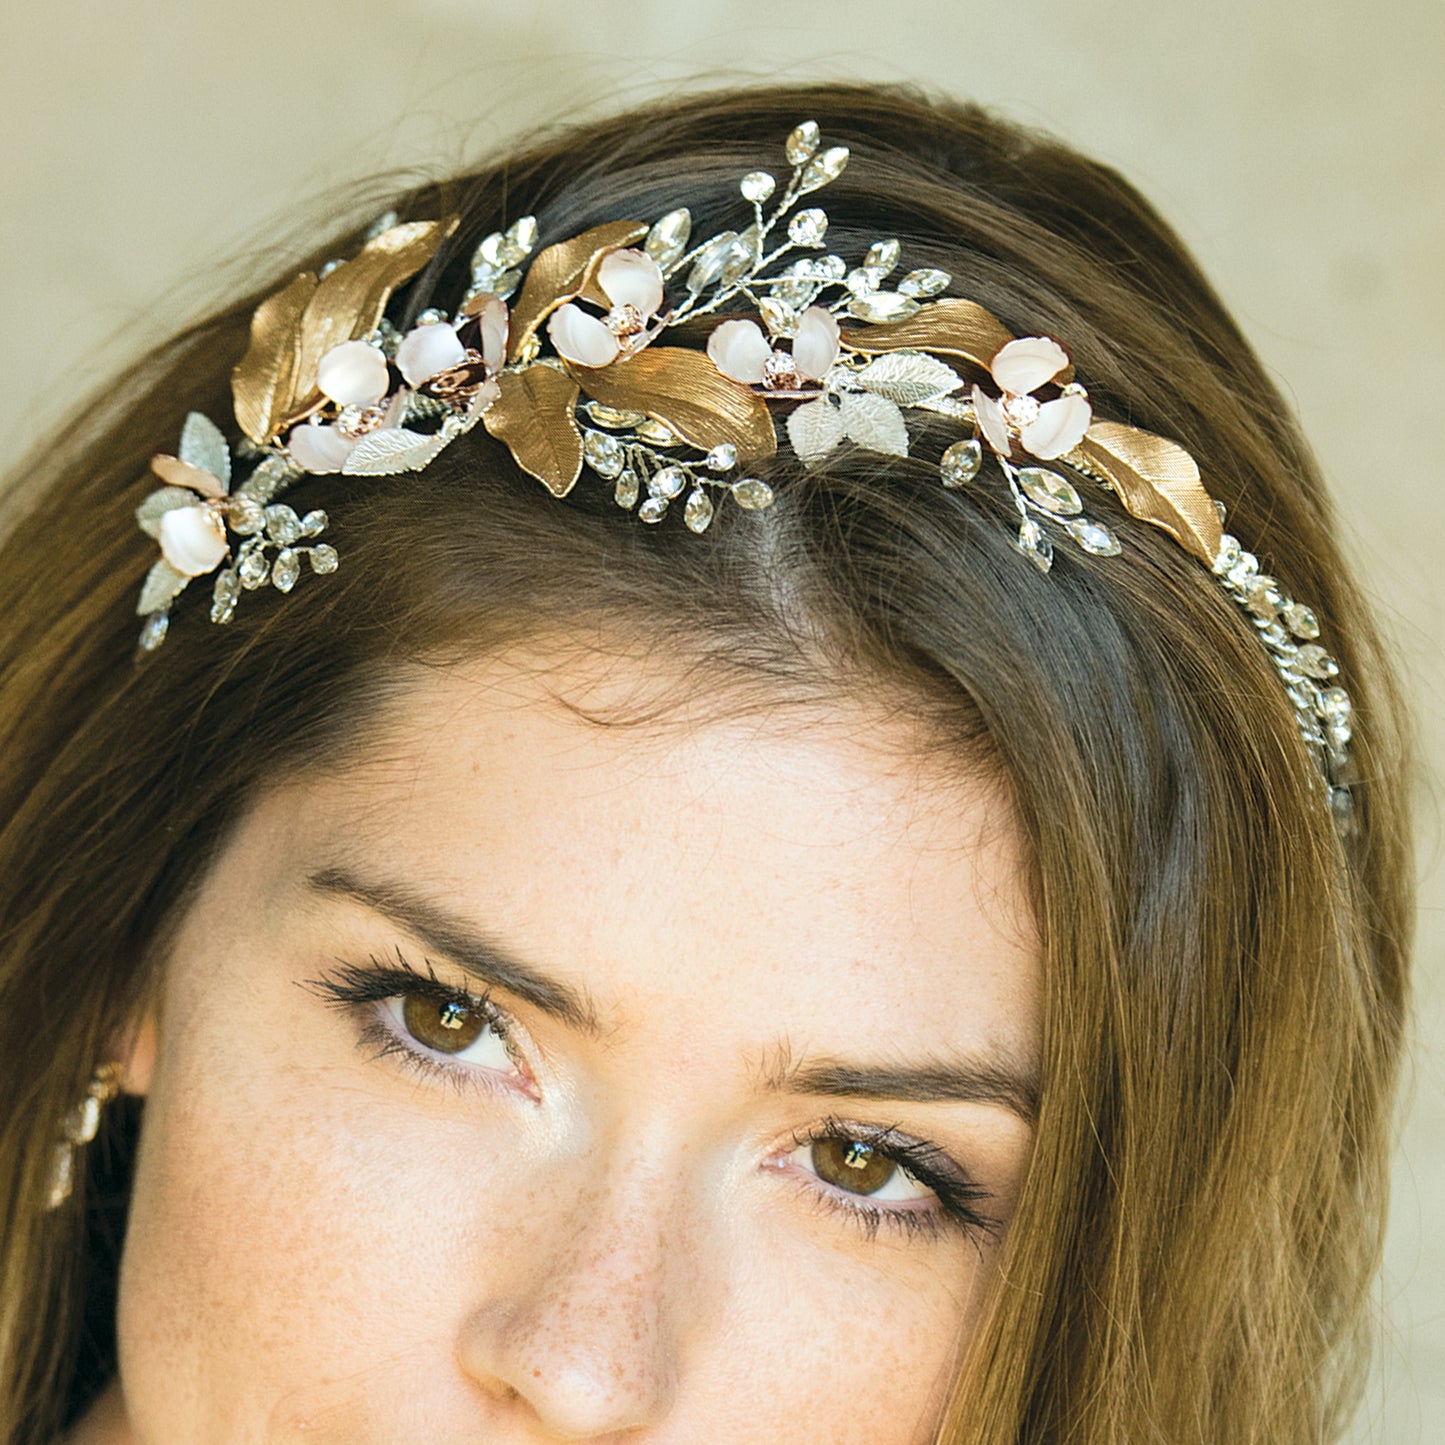 April - Bronze Rose and Silver Crystal Bohemian Floral Headpiece